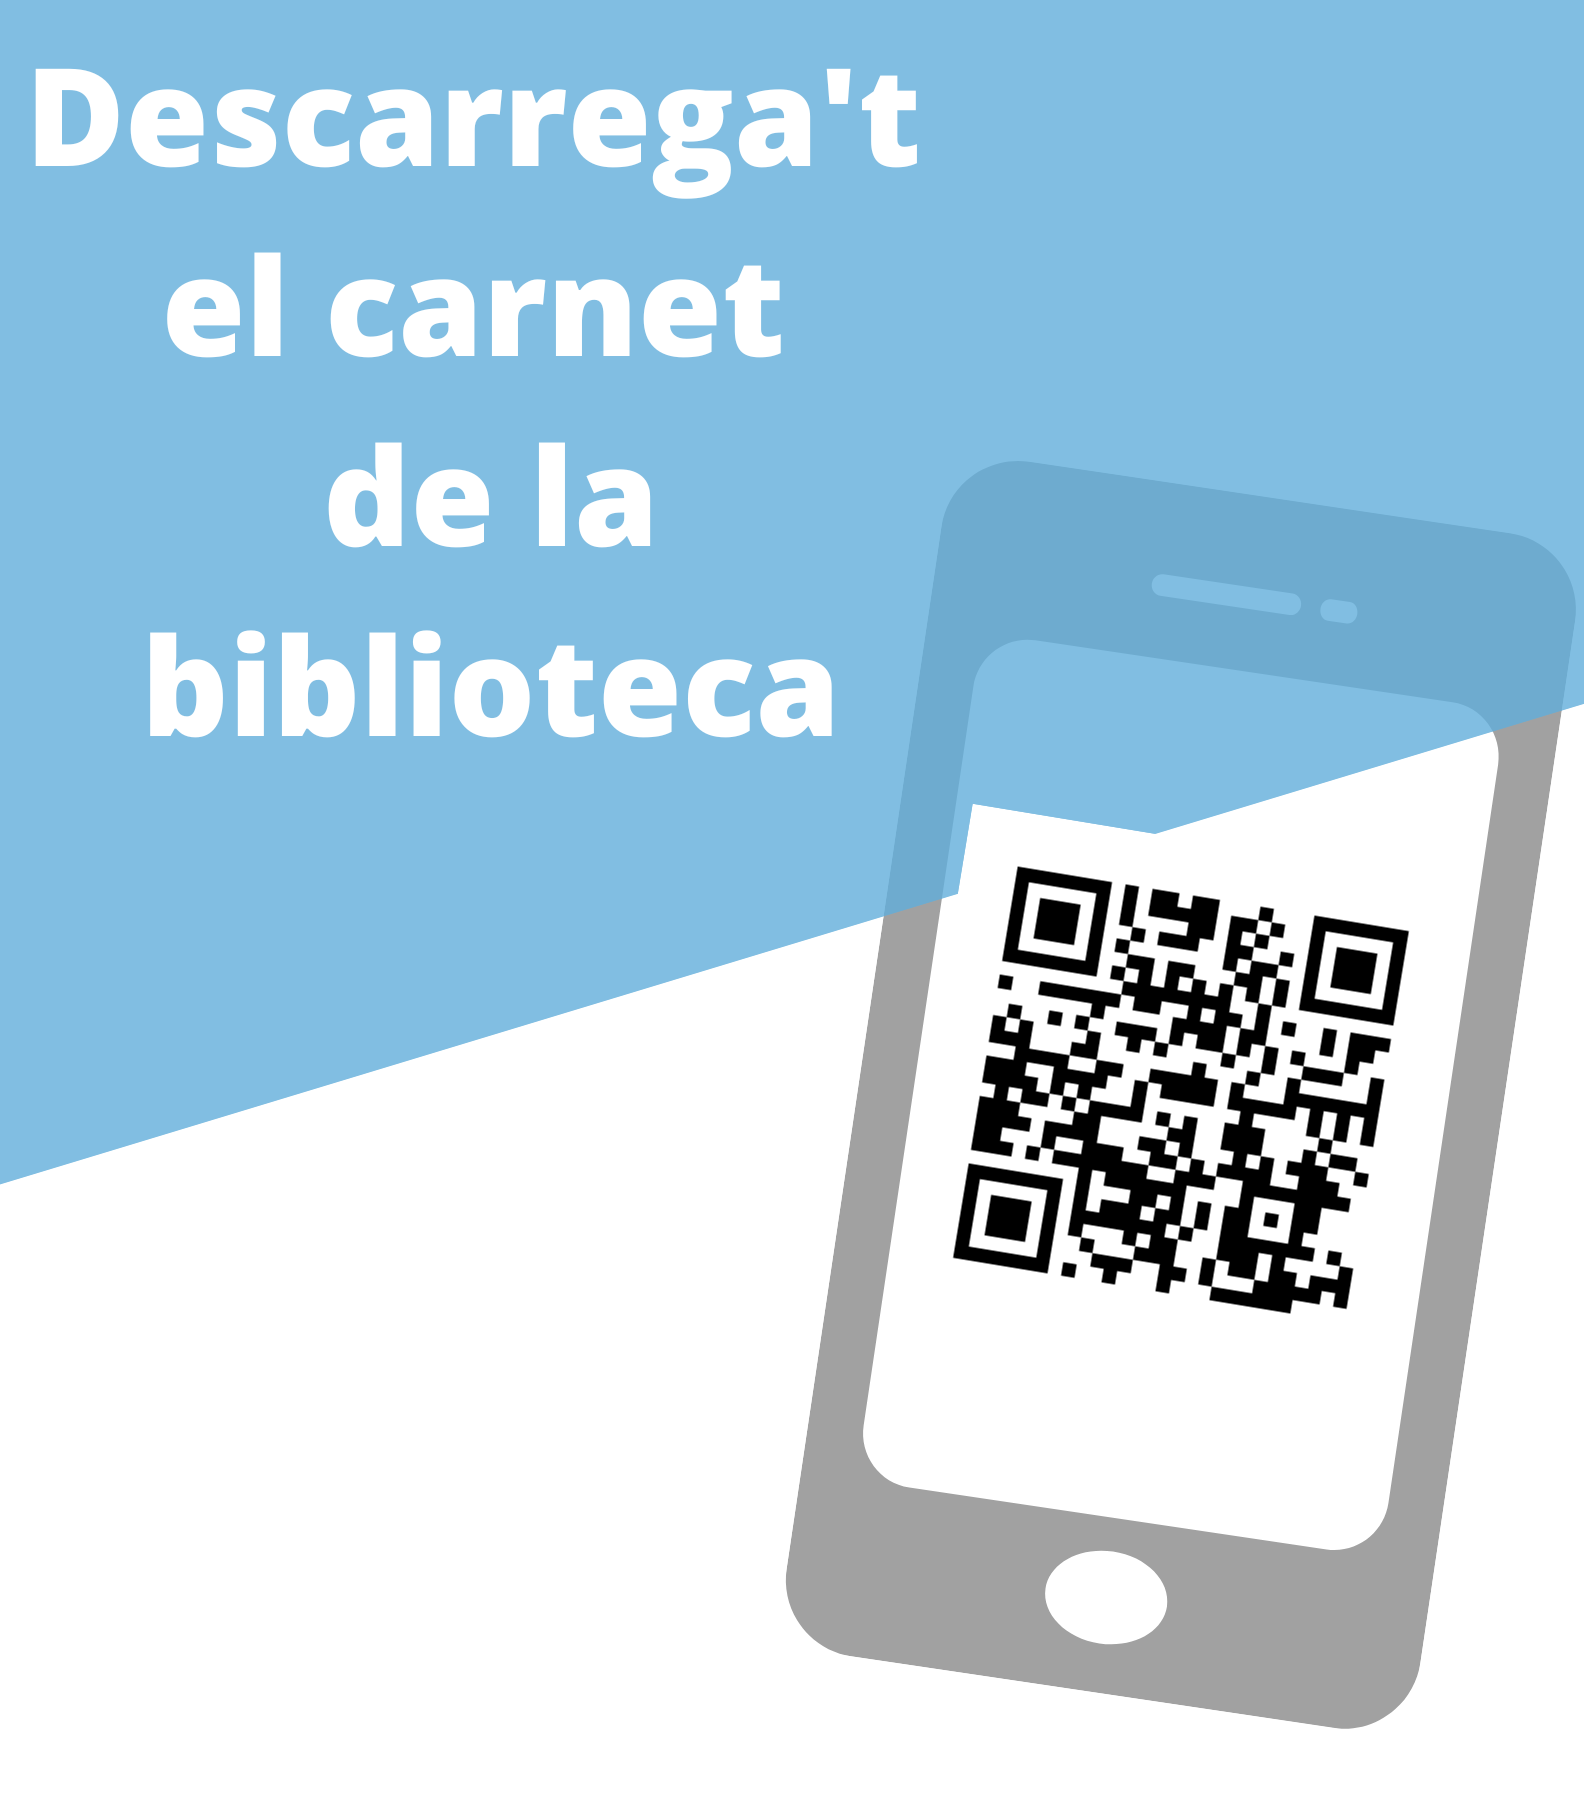 Download your library card in one click!